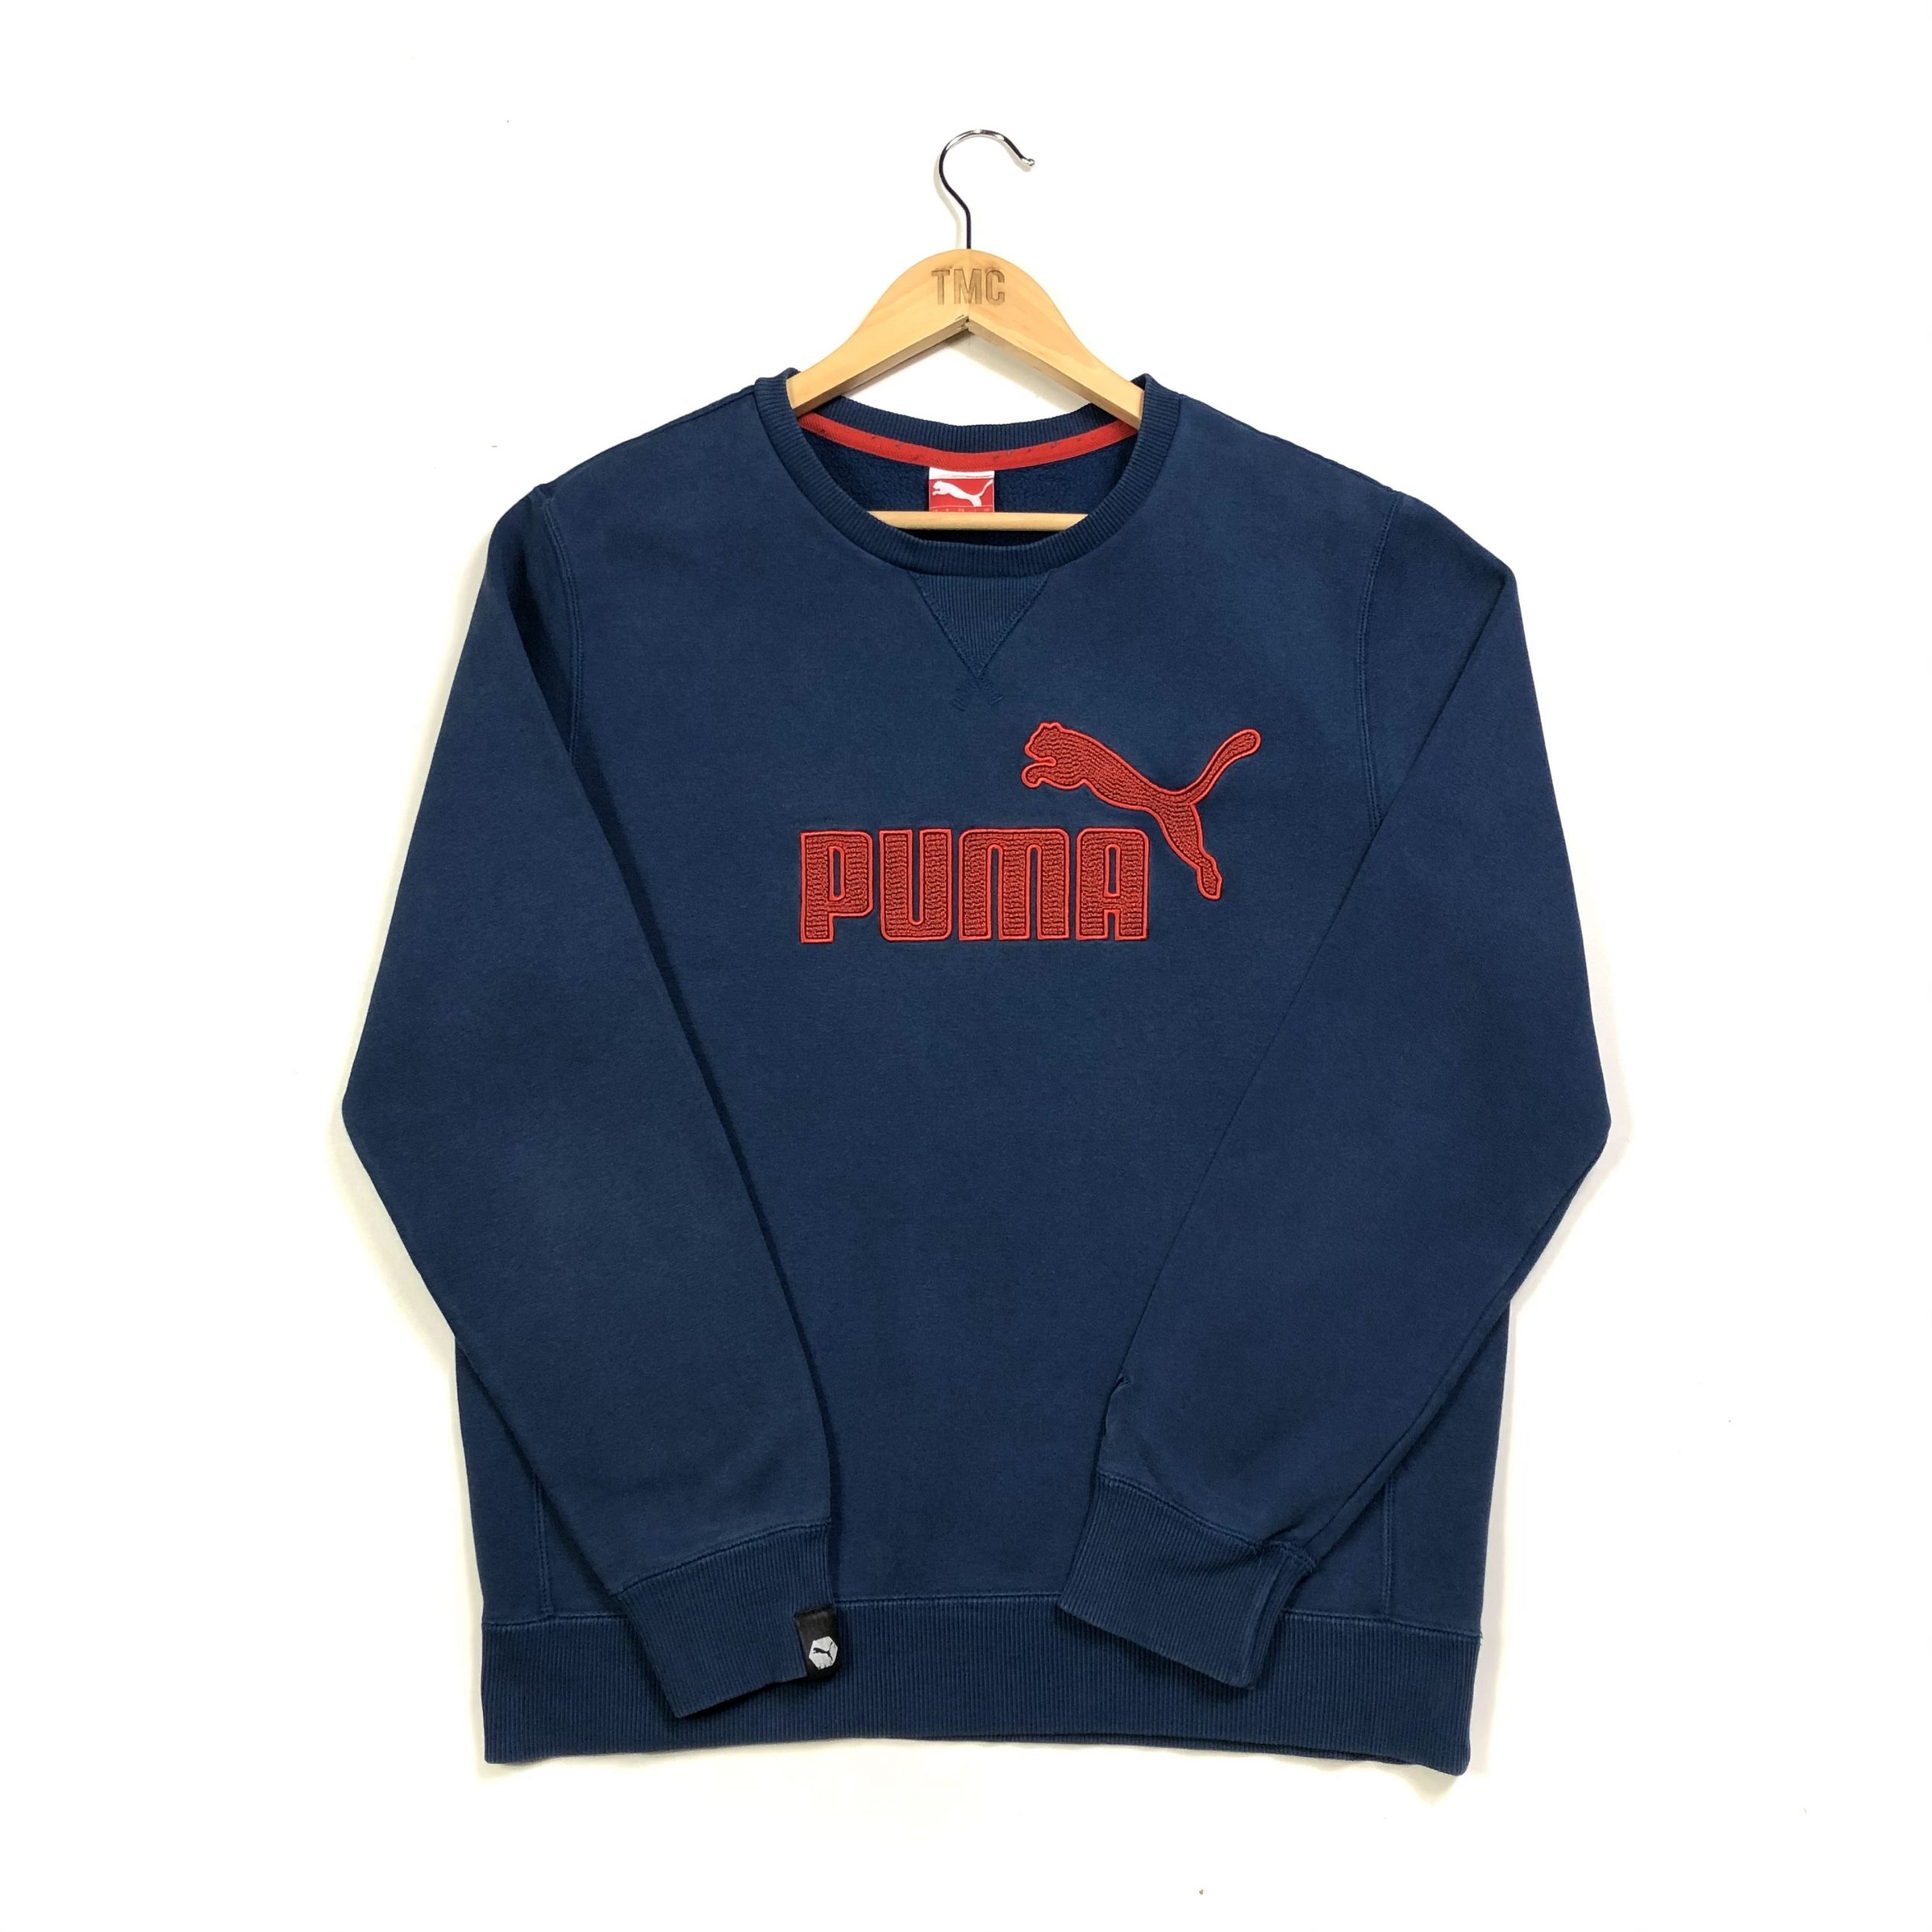 Puma Embroidered Spell Out Sweatshirt - Blue - M - TMC Vintage ...